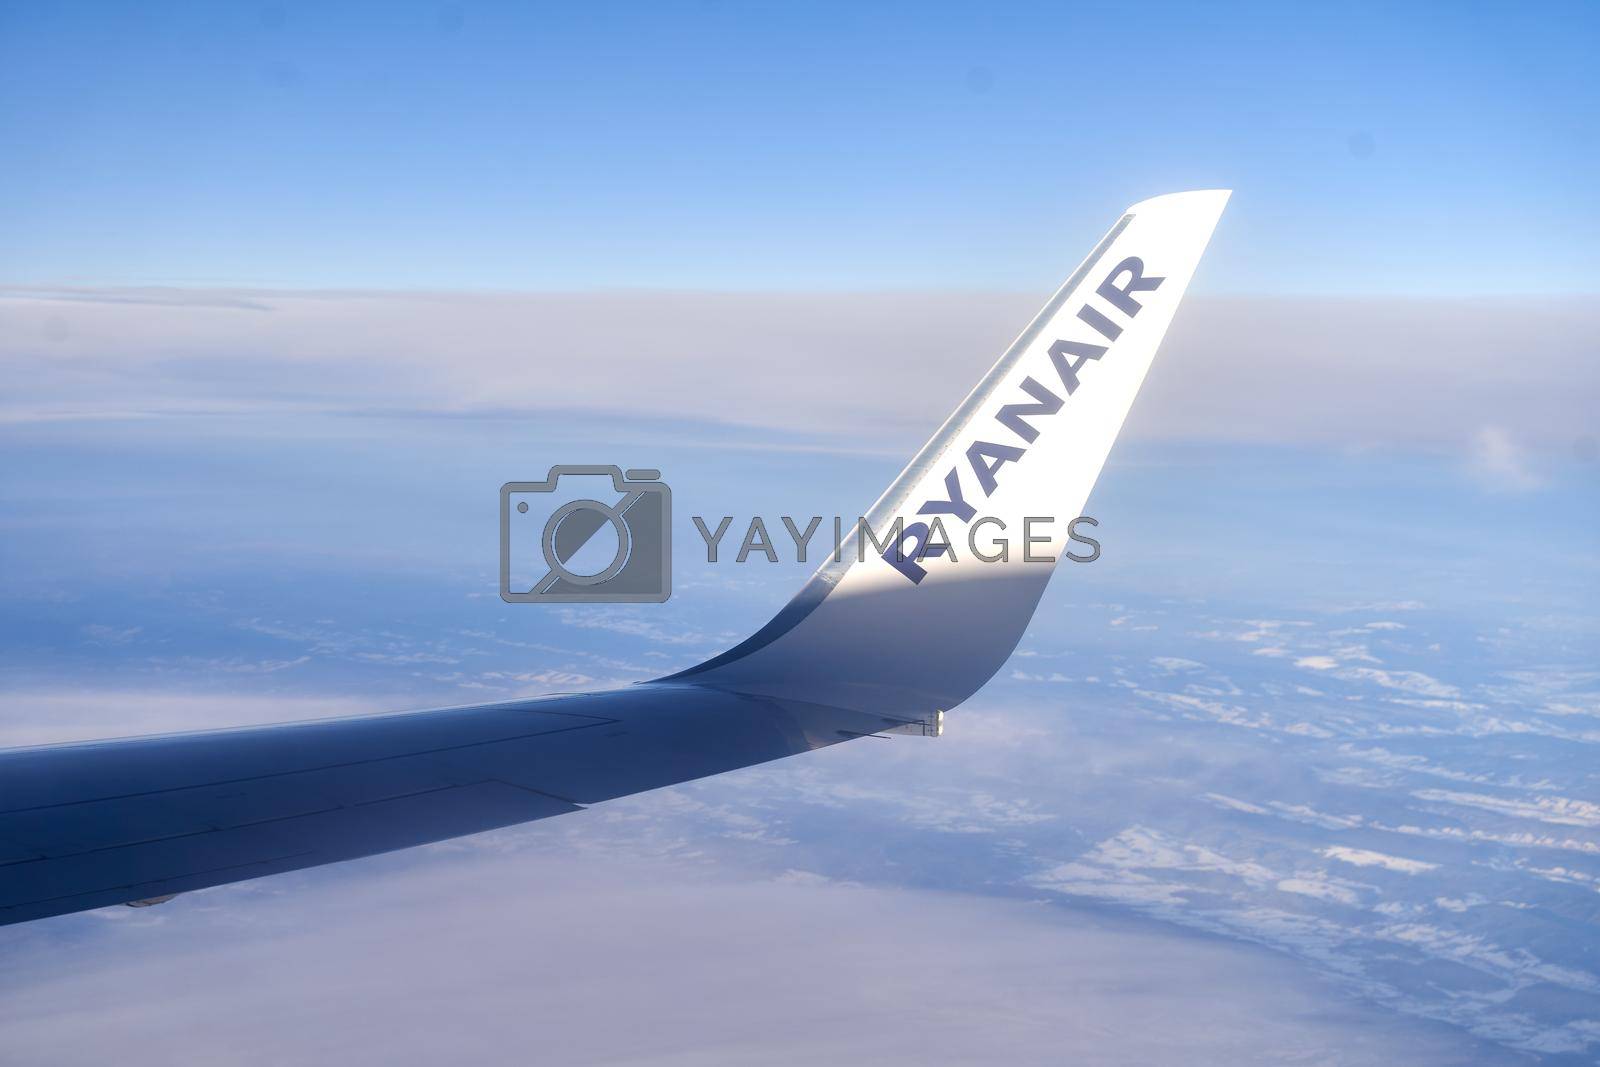 Pisa, Italy, Dec 4, 2021: Logo of Ryanair DAC, an Irish ultra-low-cost carrier, on the winglet of an airplane flying over Europe.